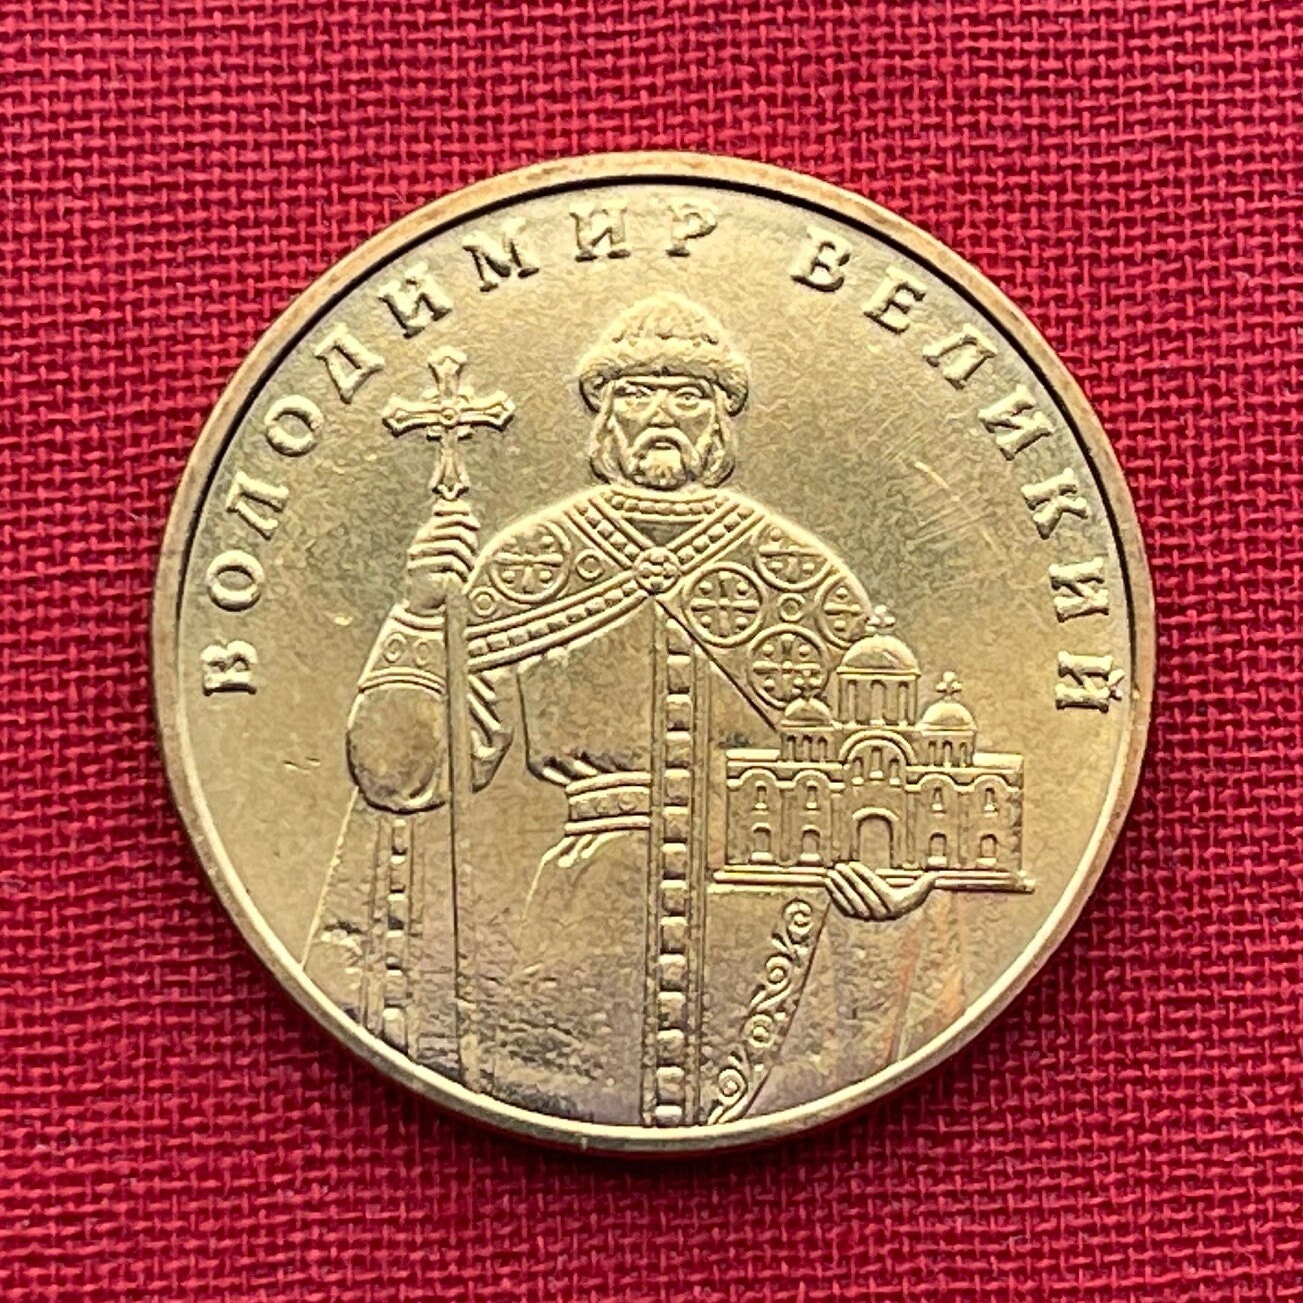 Saint Vladimir the Great 1 Hryvnia Ukraine Authentic Coin Money for Jewelry and Craft Making (Volodymyr the Great)